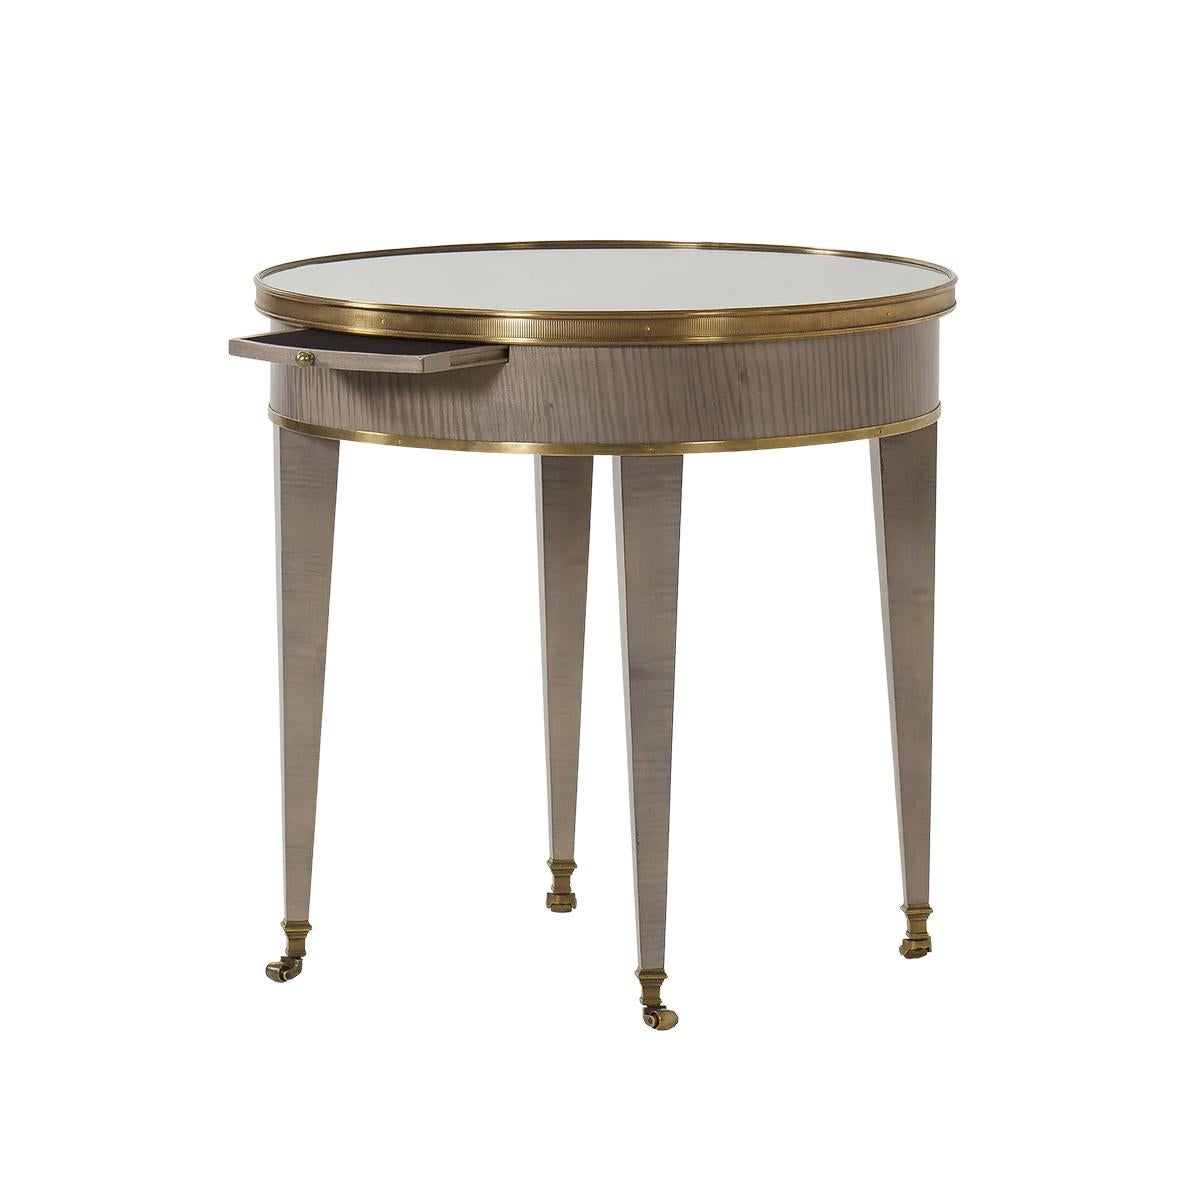 Modern Neo Classic Round Side Table. Styled after an 18th-century French Louis XVI Bouillotte table. It has a mirrored top, a candle slide, brass time, exotic greyed Sycamore wood and is raised on square tapered legs with brass caster